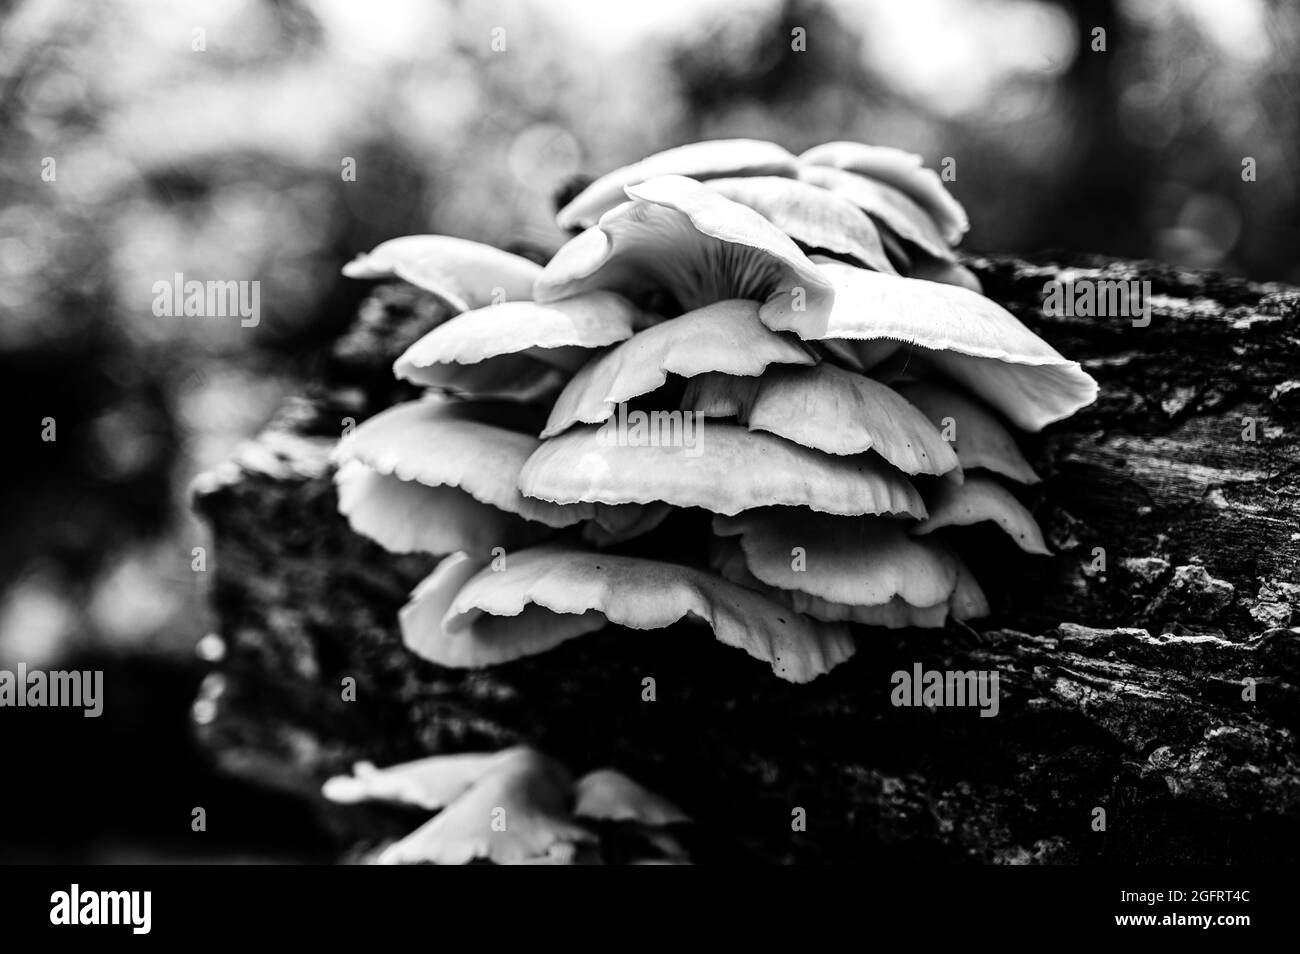 White Oyster Mushrooms growing on a decaying log in a forest Stock Photo